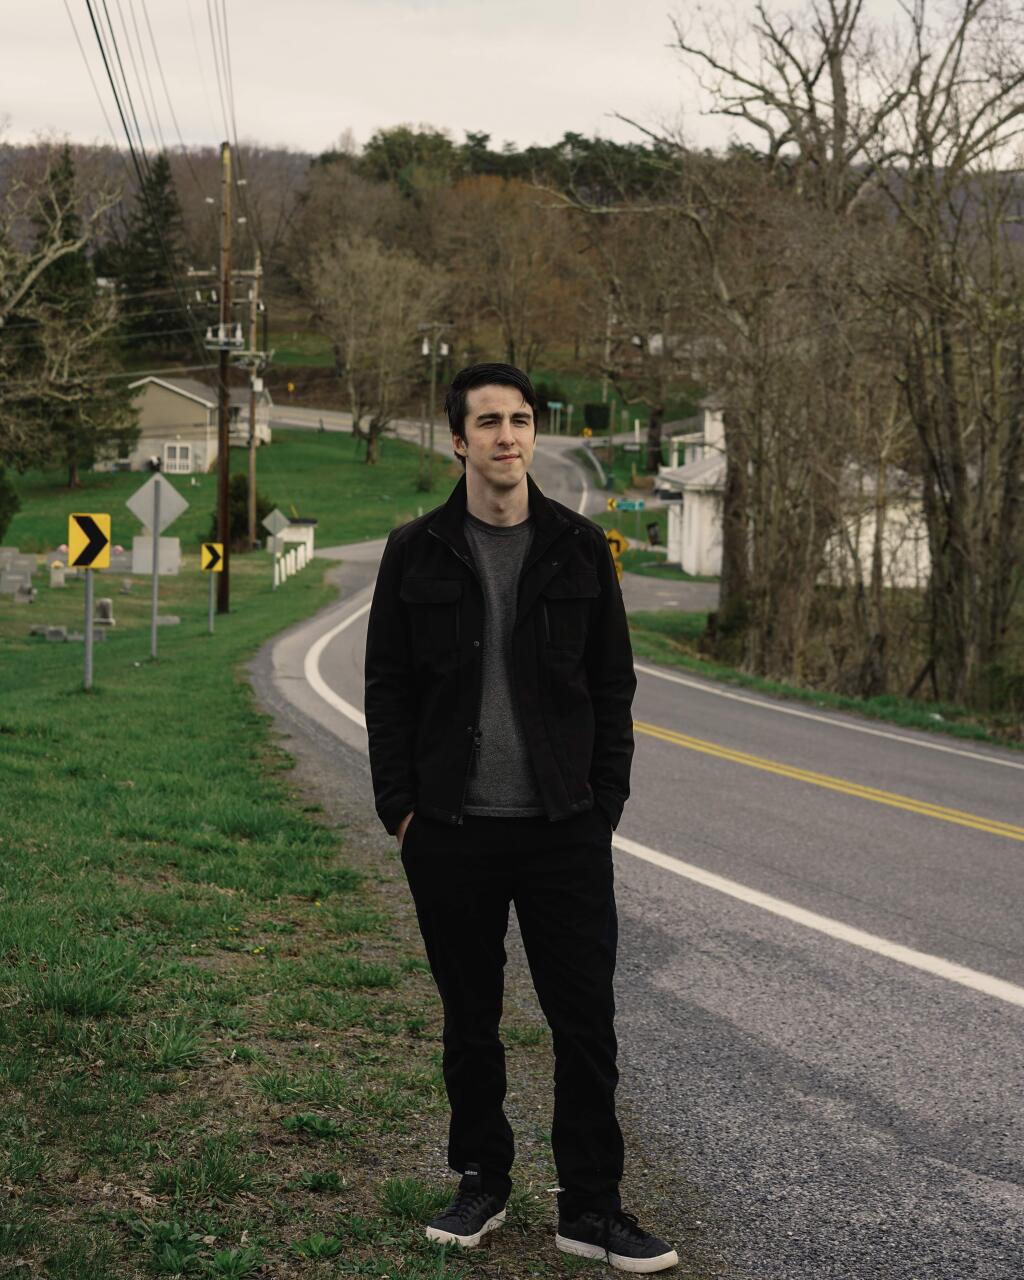 Caleb Cain, who spent years consumed by what he calls a “decentralized cult” of far-right YouTube personalities, in Berkeley Springs, W.Va., April 10, 2019. Some young men discover the videos by accident, others seek them out. Some travel all the way to neo-Nazism, others stop at bigotry. The common thread is YouTube and its recommendation algorithm. “I was brainwashed,” Cain says. (Justin T. Gellerson/The New York Times)